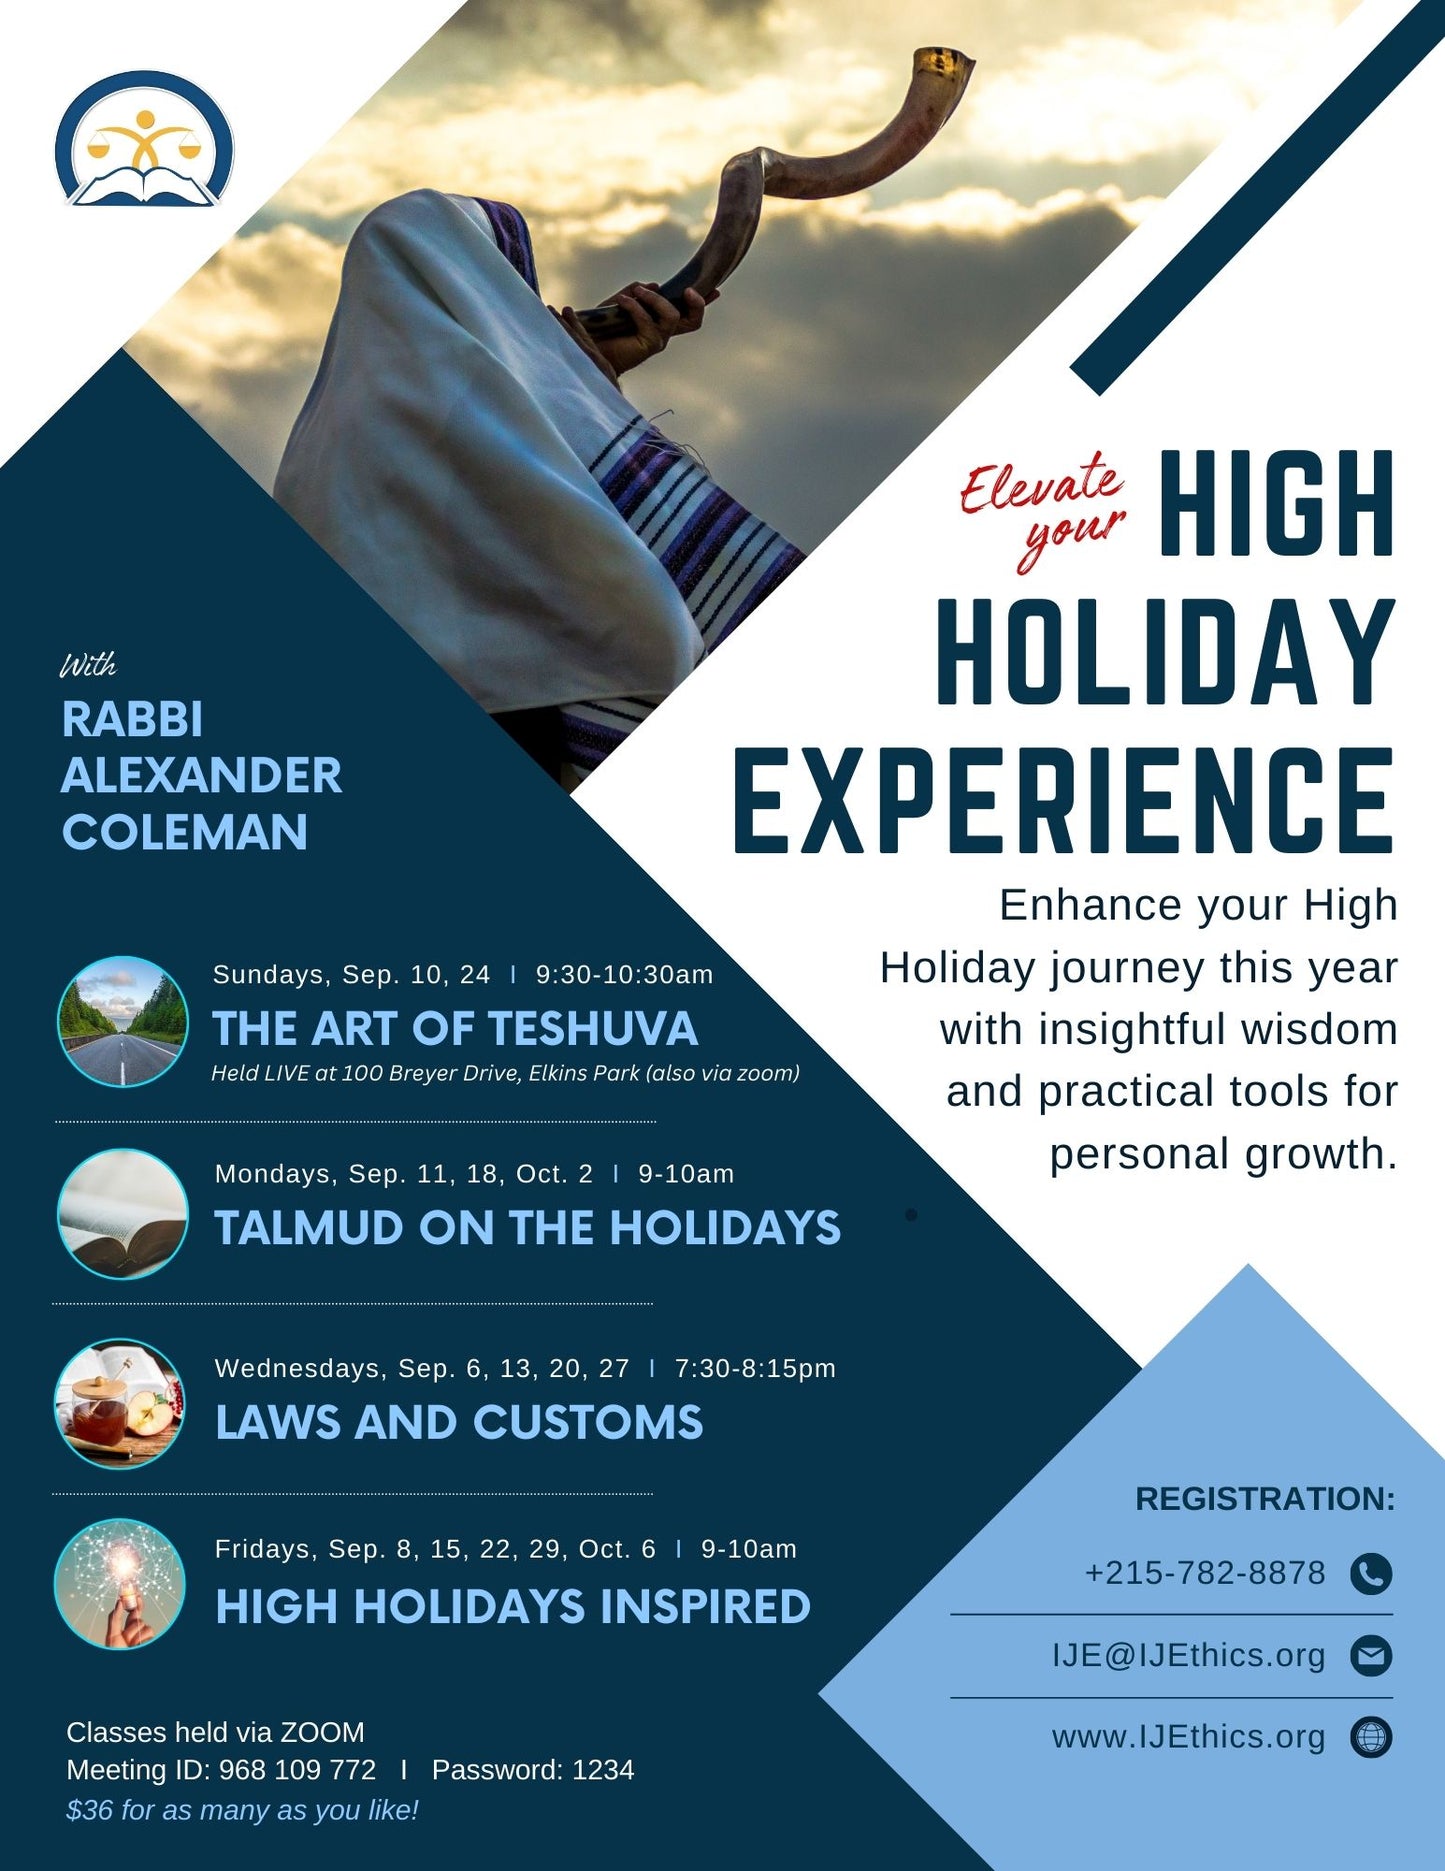 High Holiday Experience